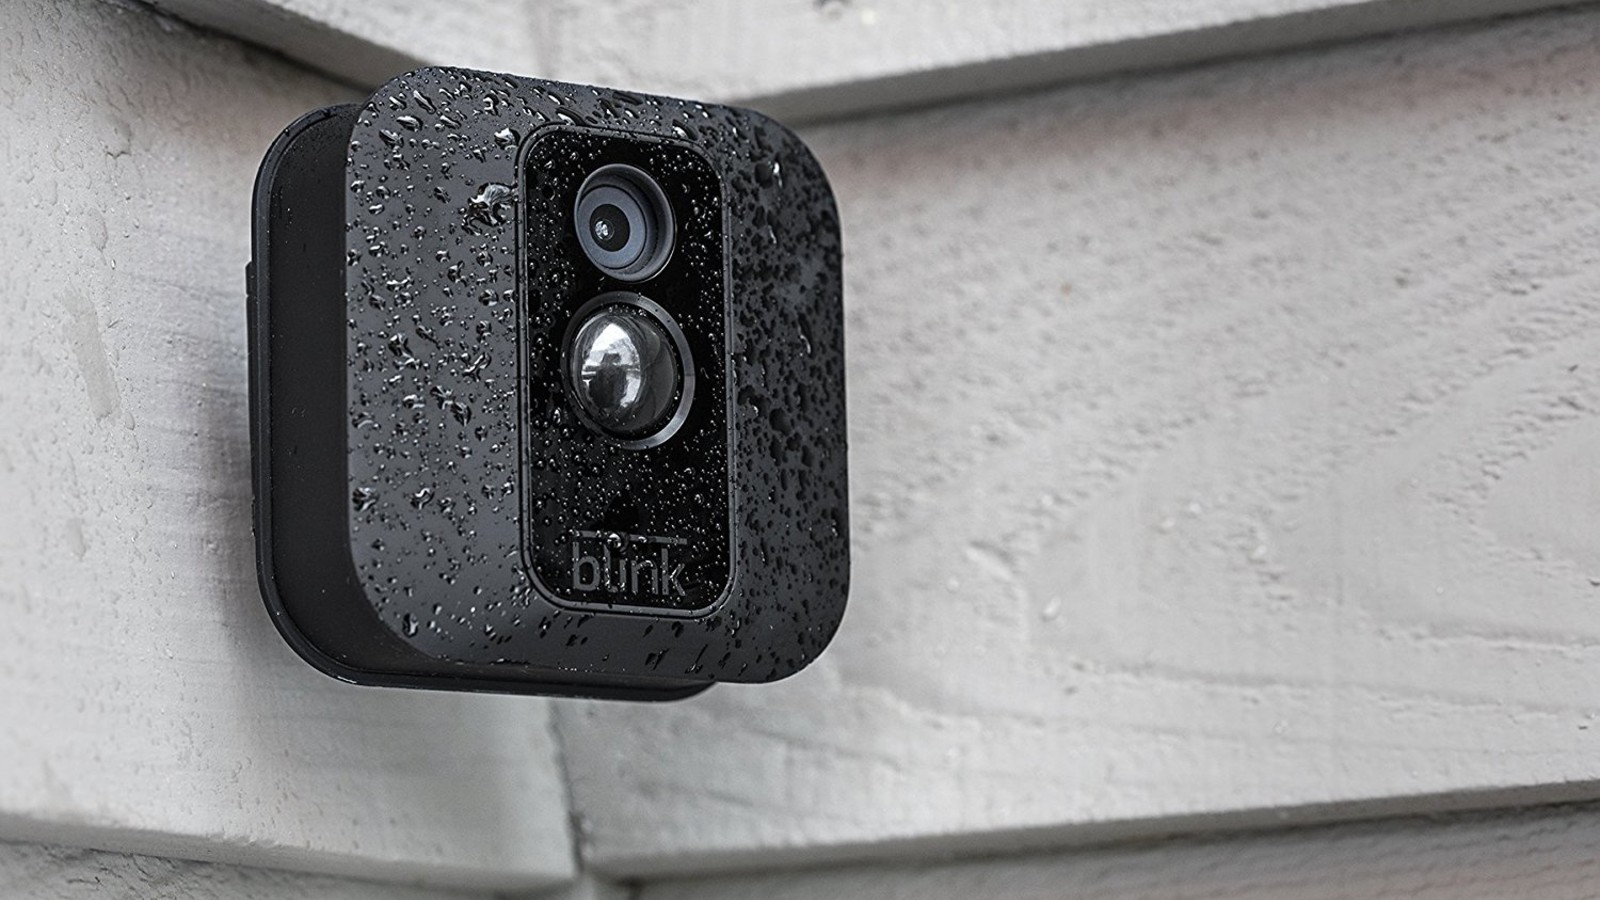 Amazon Blink Outdoor mounted on a wall